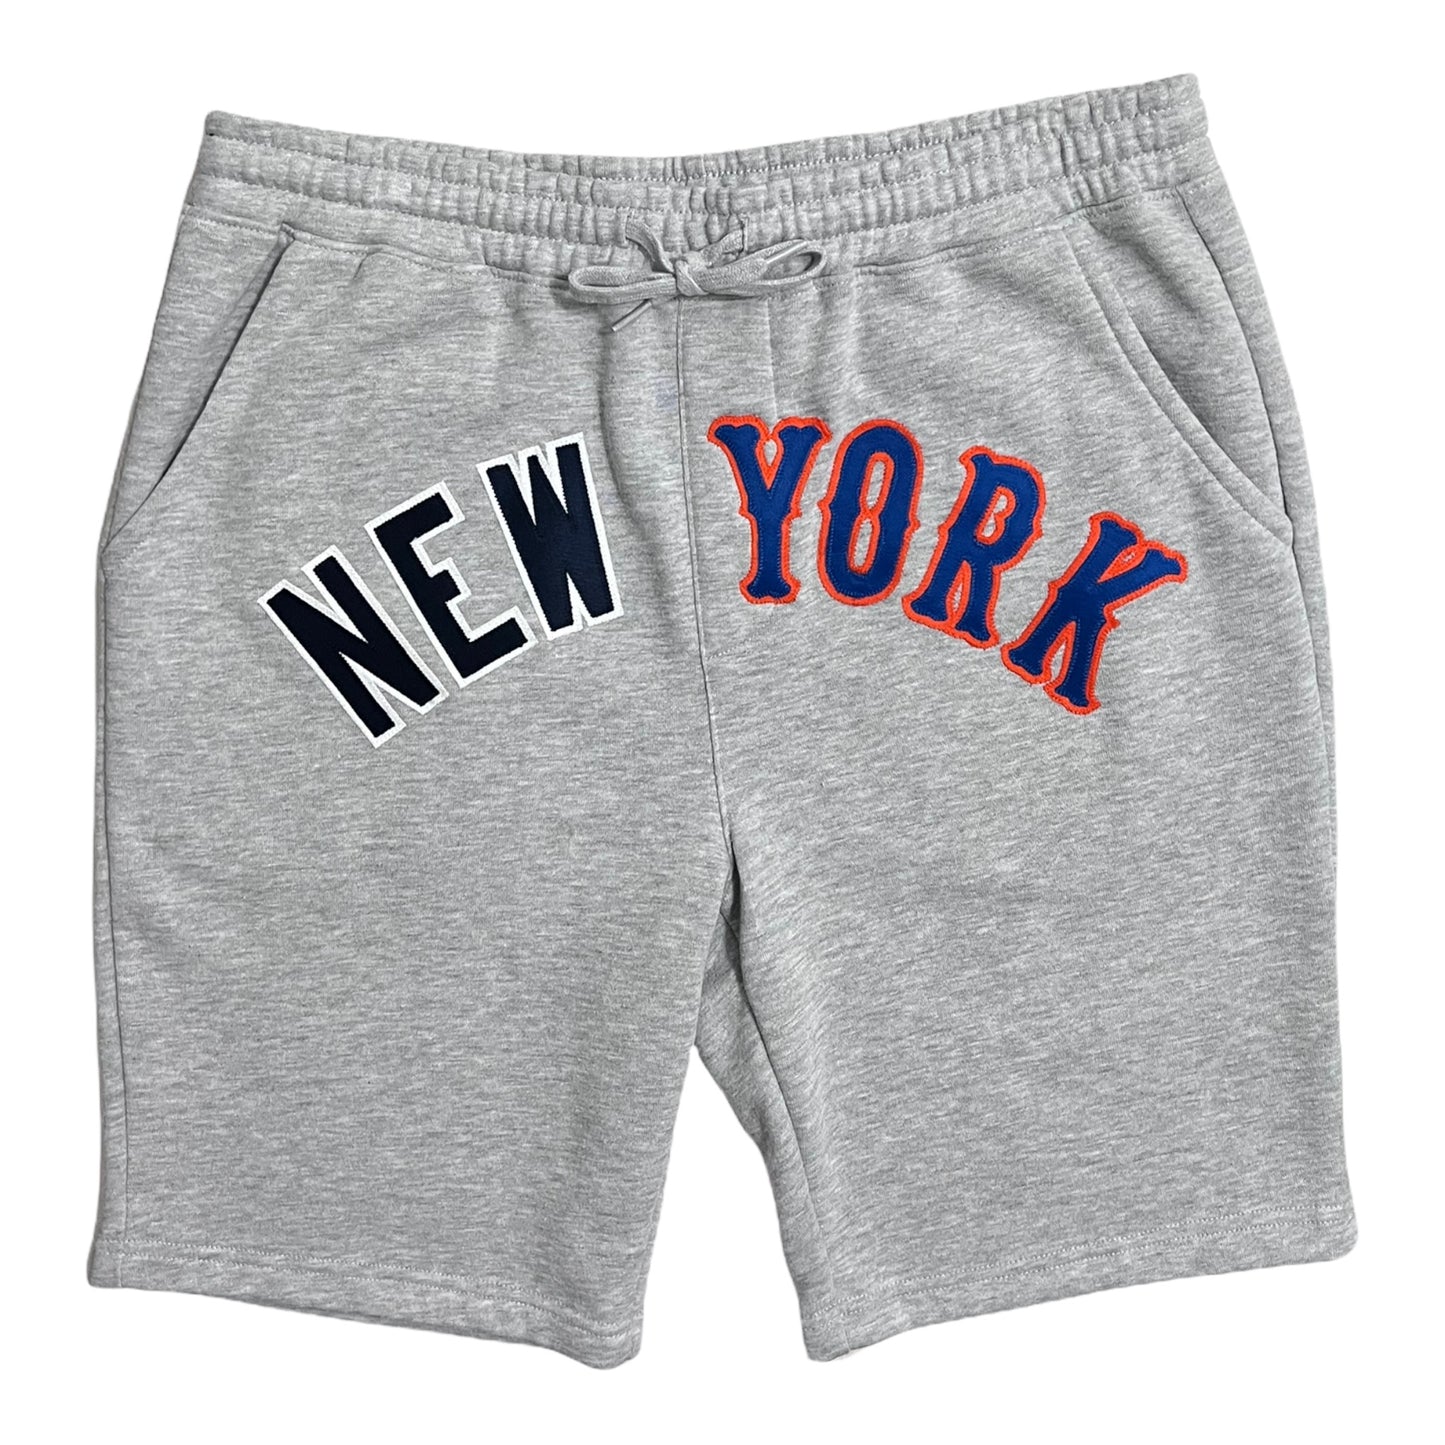 New York Shorts Limited Edition